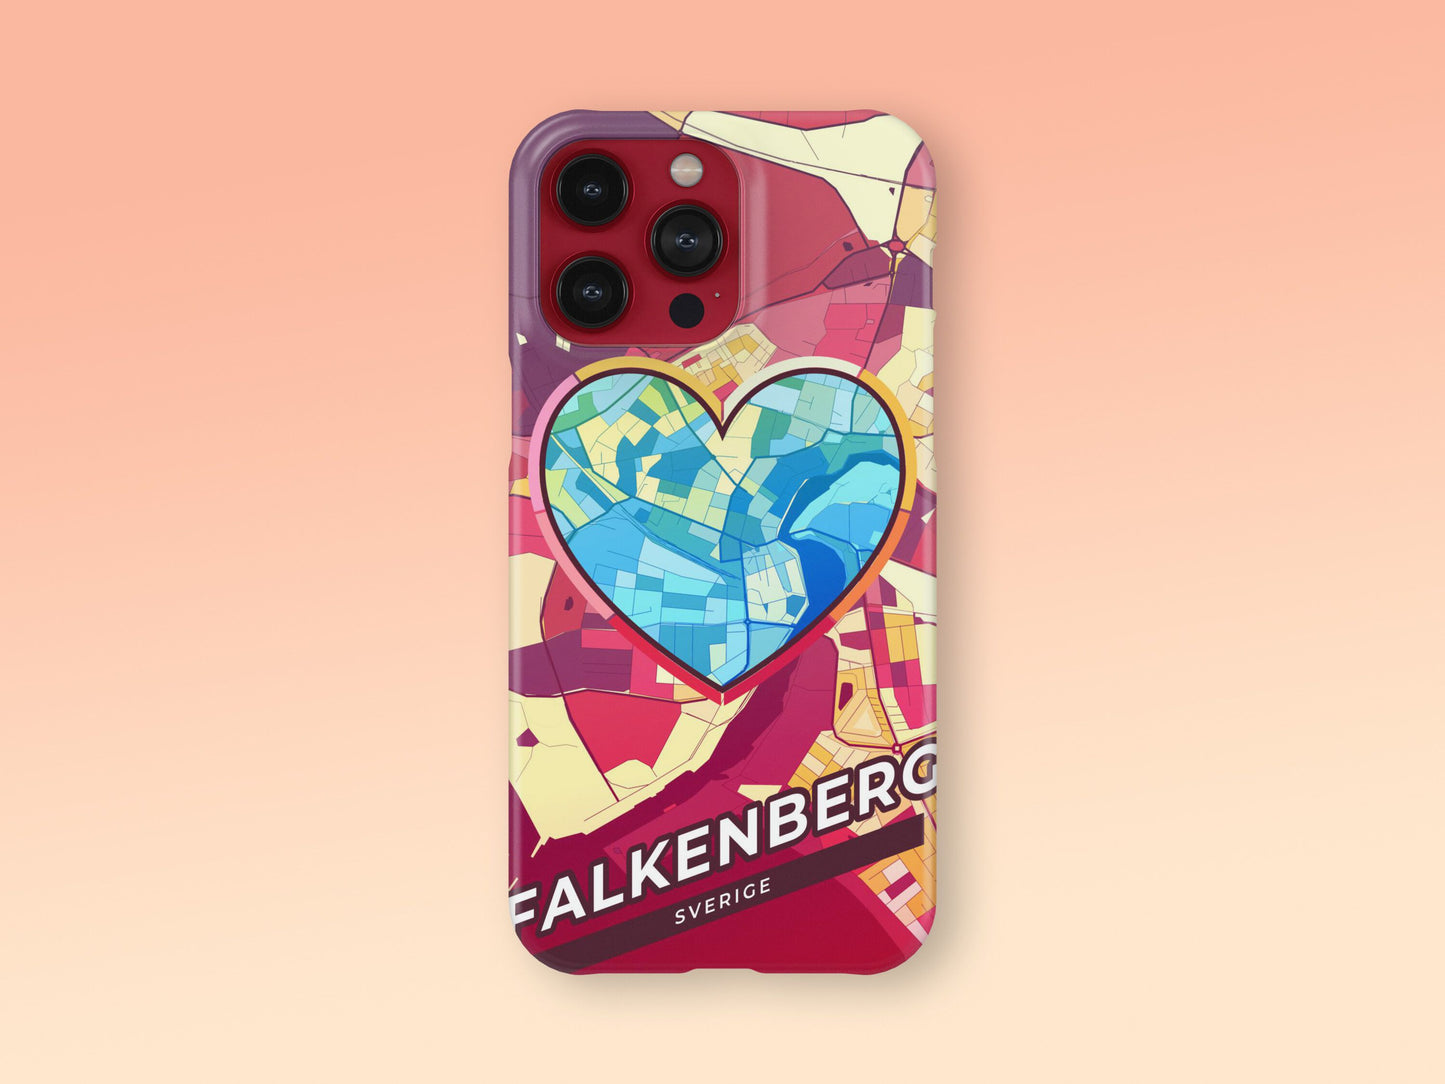 Falkenberg Sweden slim phone case with colorful icon. Birthday, wedding or housewarming gift. Couple match cases. 2